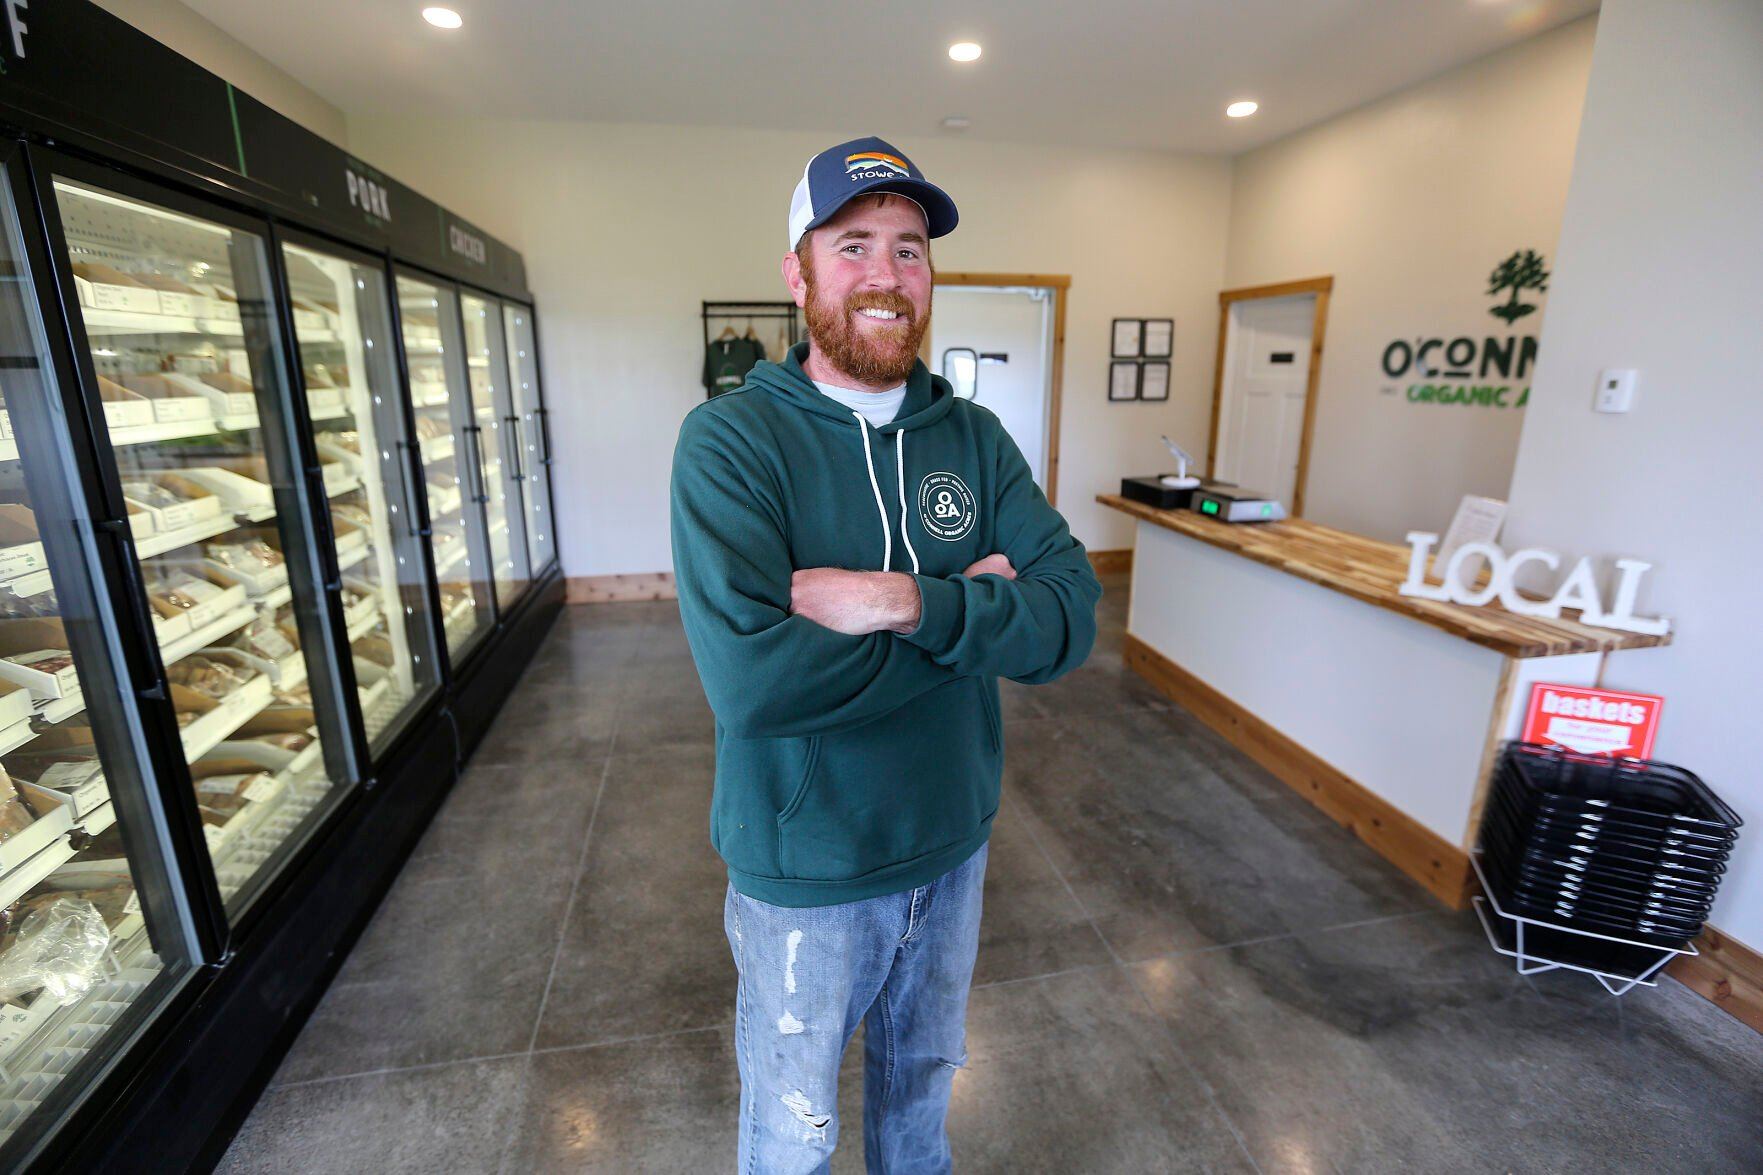 Chris O’Connell, owner of O’Connell Organic Acres near Durango, Iowa, stands inside his new storefront.    PHOTO CREDIT: Dave Kettering